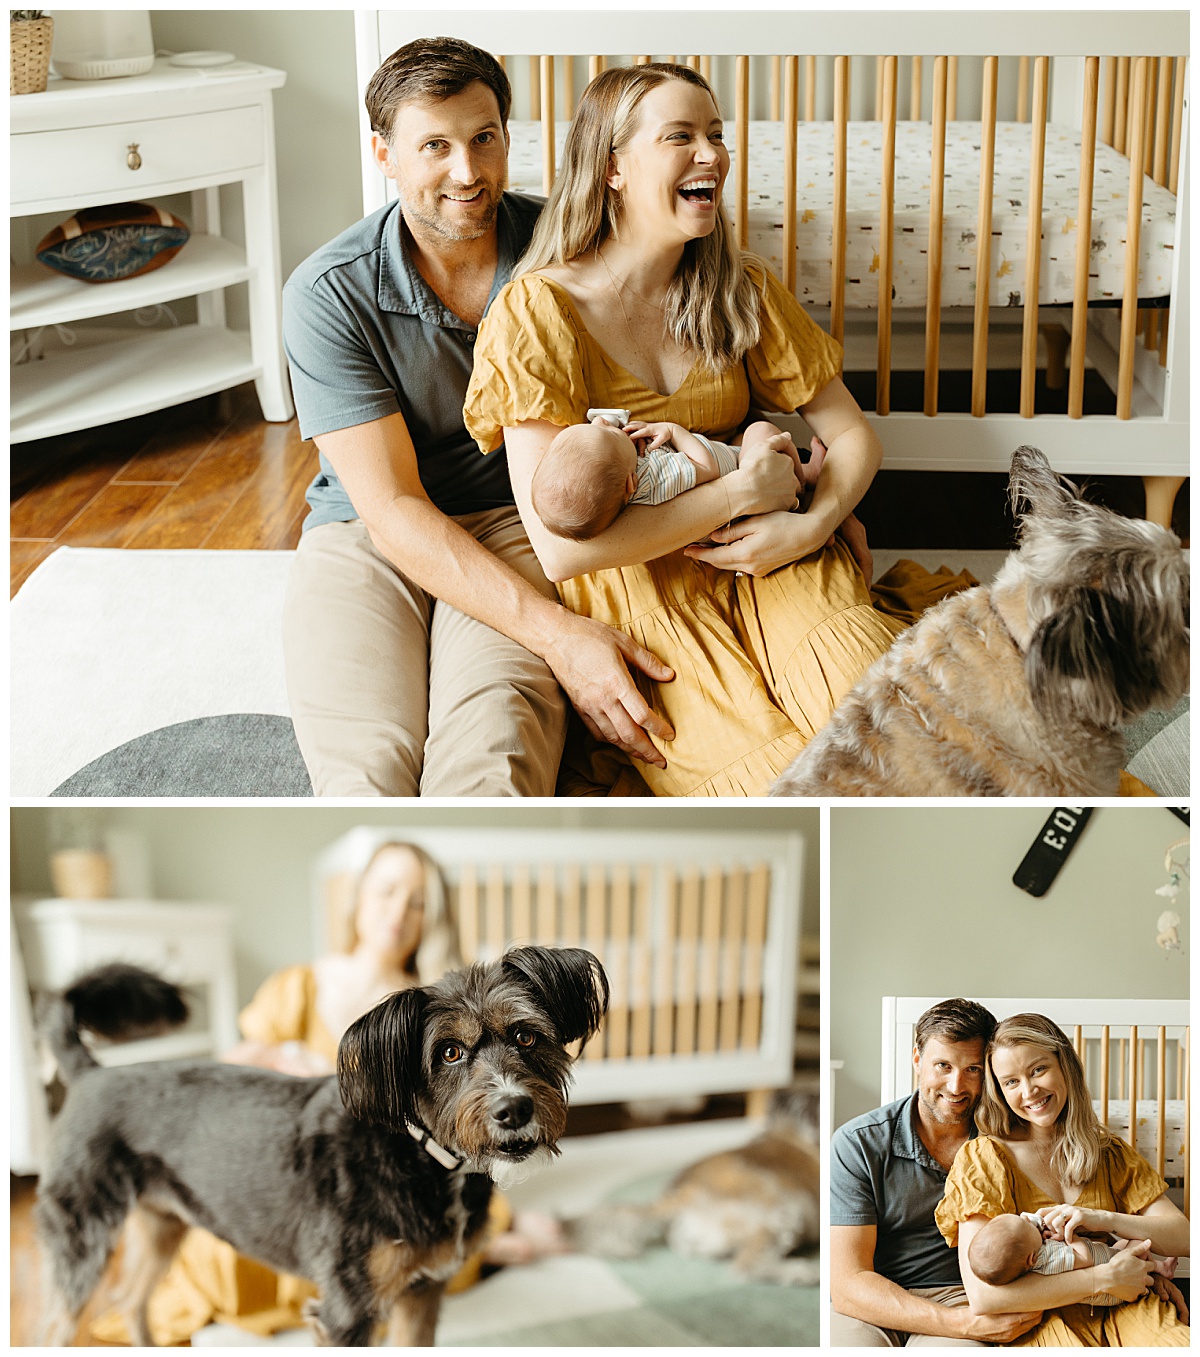 dog looks with ears perked up while man and woman hold infant by Nikki Meer Photography